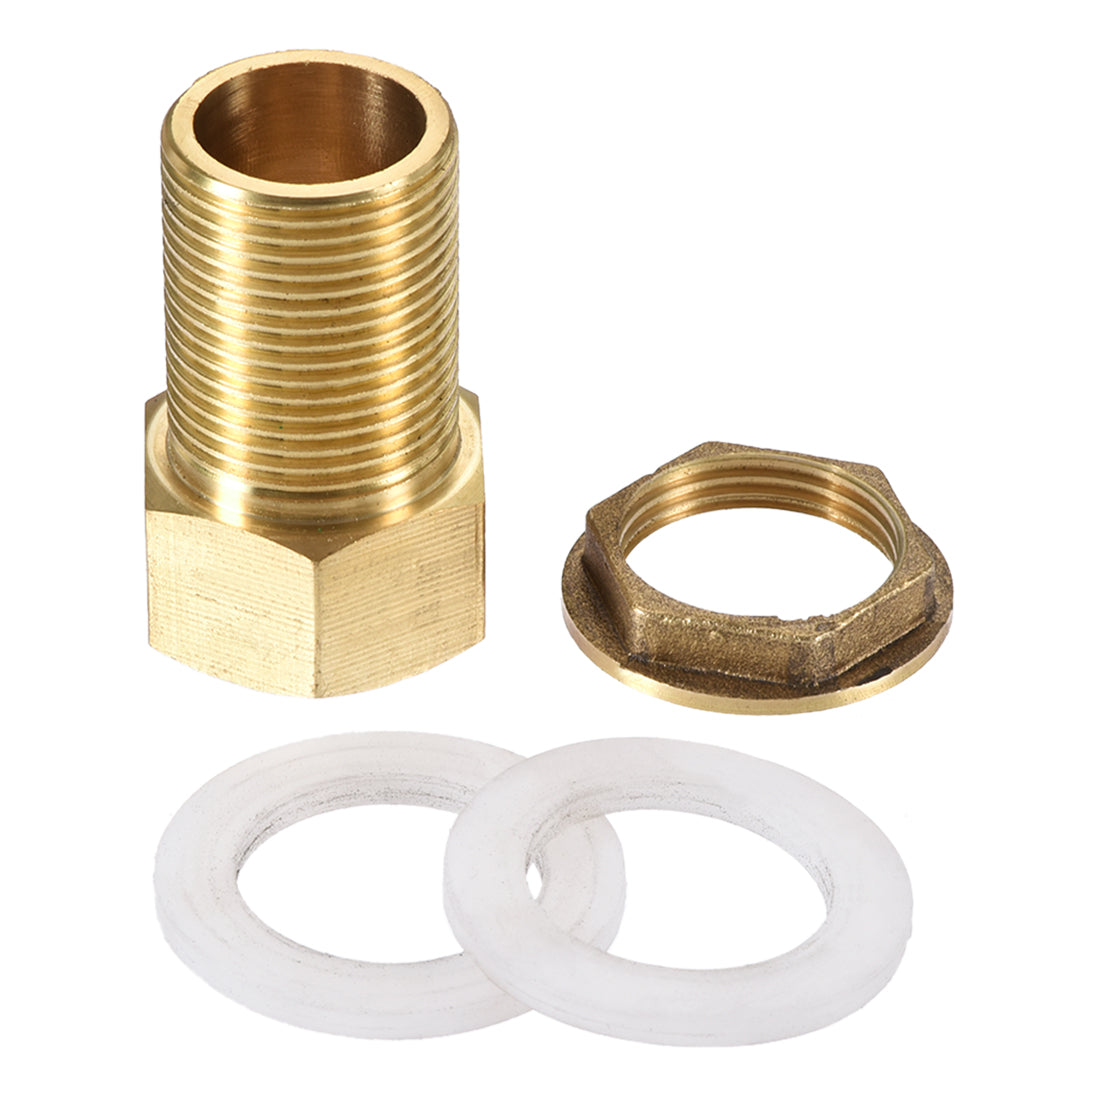 uxcell Uxcell Bulkhead Fitting, G3/4 Male 0.95" Female, Hex Tube Adaptor Hose Fitting, with Silicone Gaskets, for Water Tanks, Brass, Gold Tone